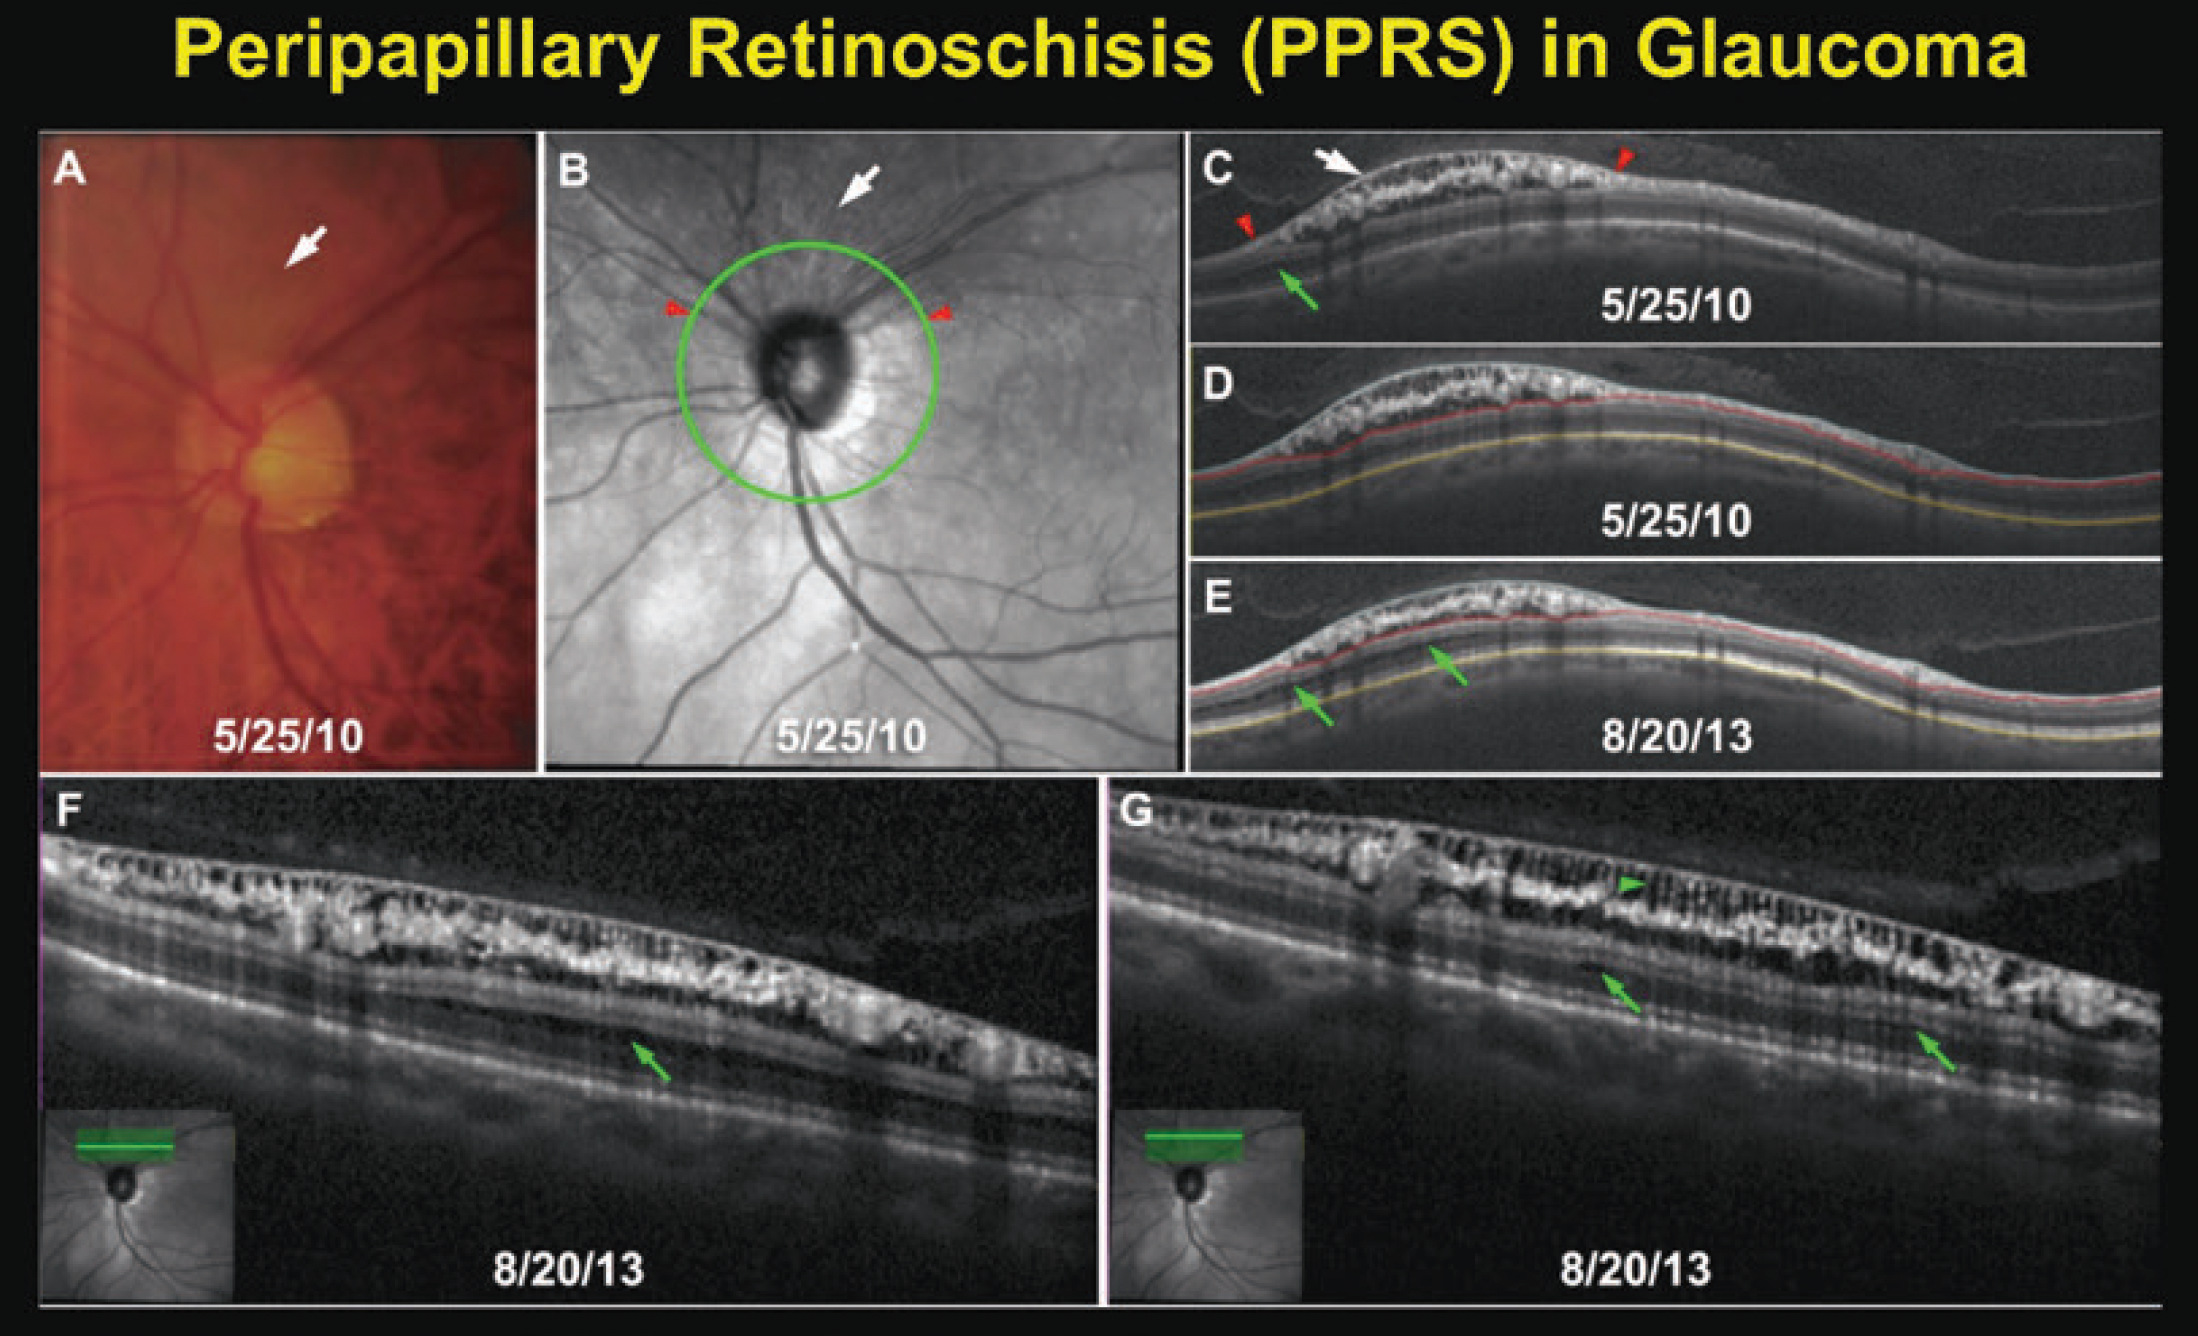 Optometrists should exercise caution when interpreting OCT data for glaucoma patients in the presence of peripapillary retinoschisis, study warns.